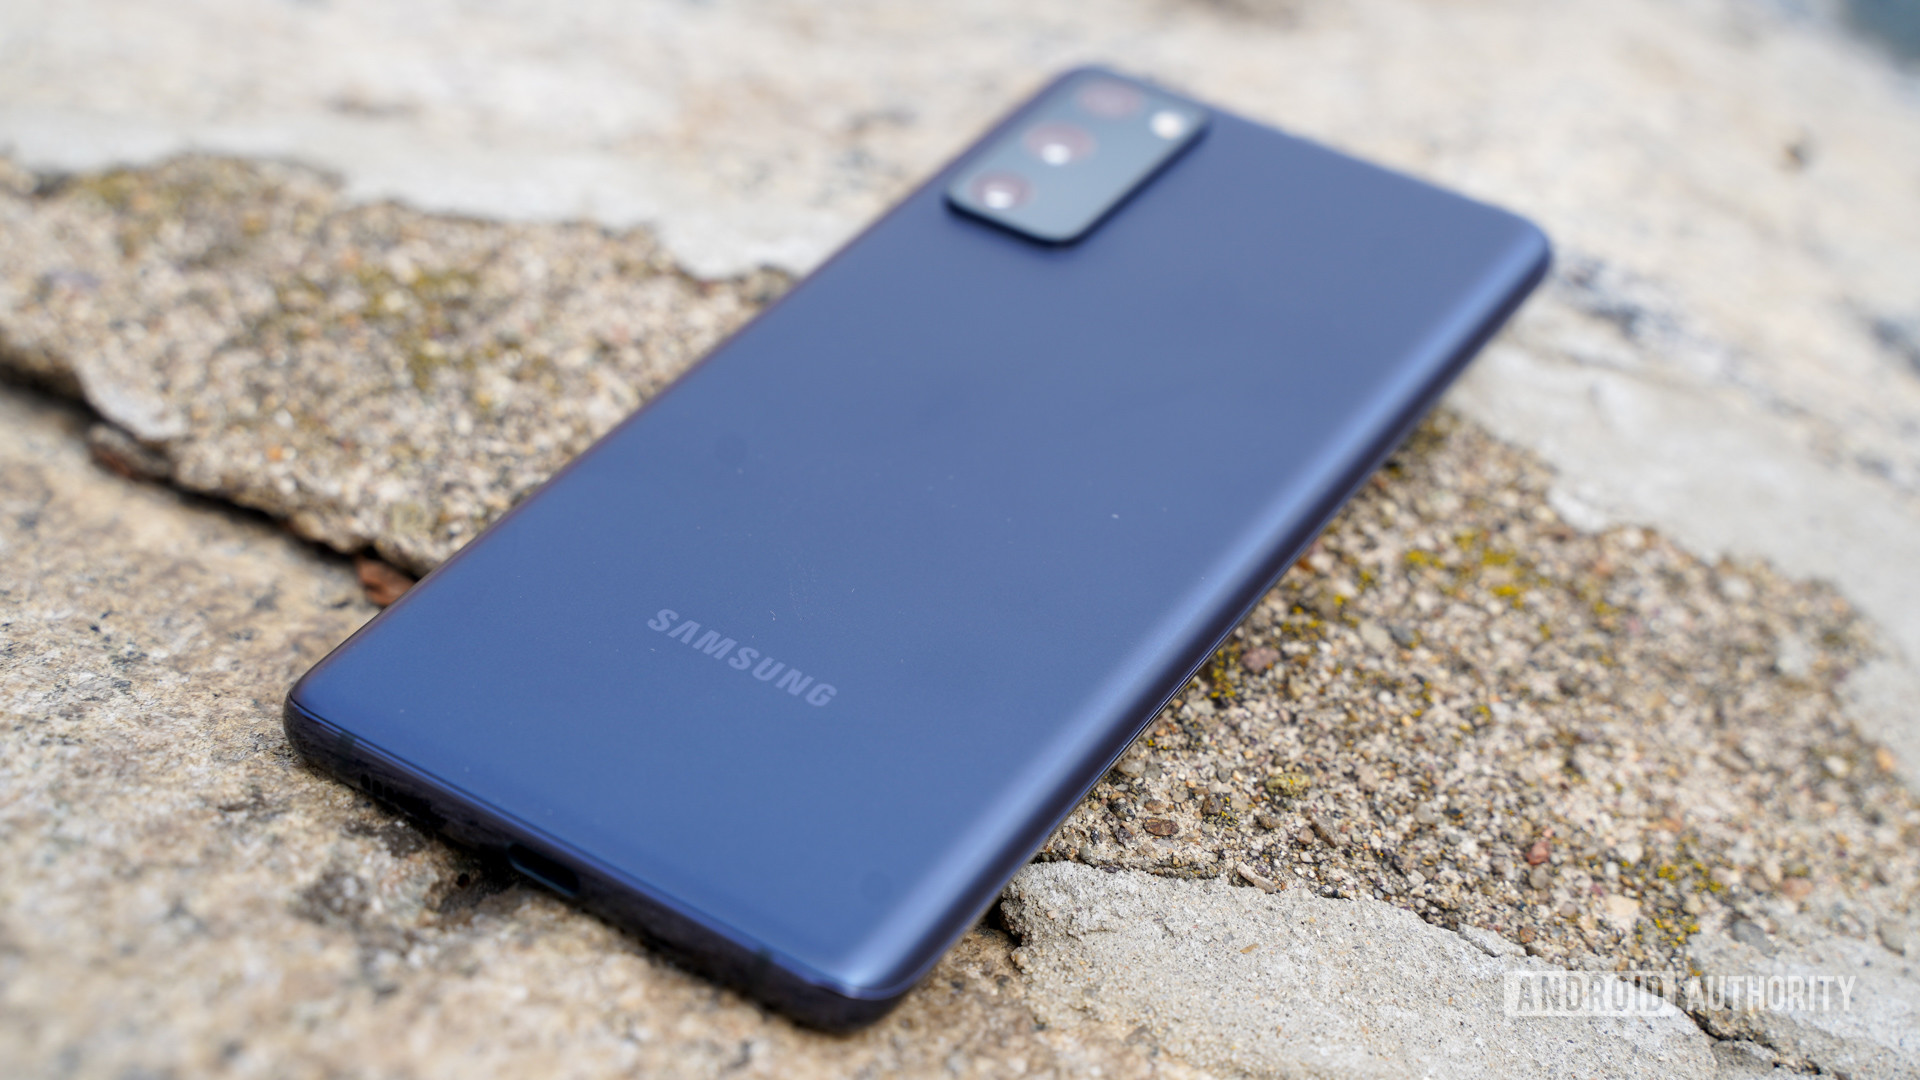 Samsung Galaxy S20 FE 5G Review - Pros and cons, Verdict